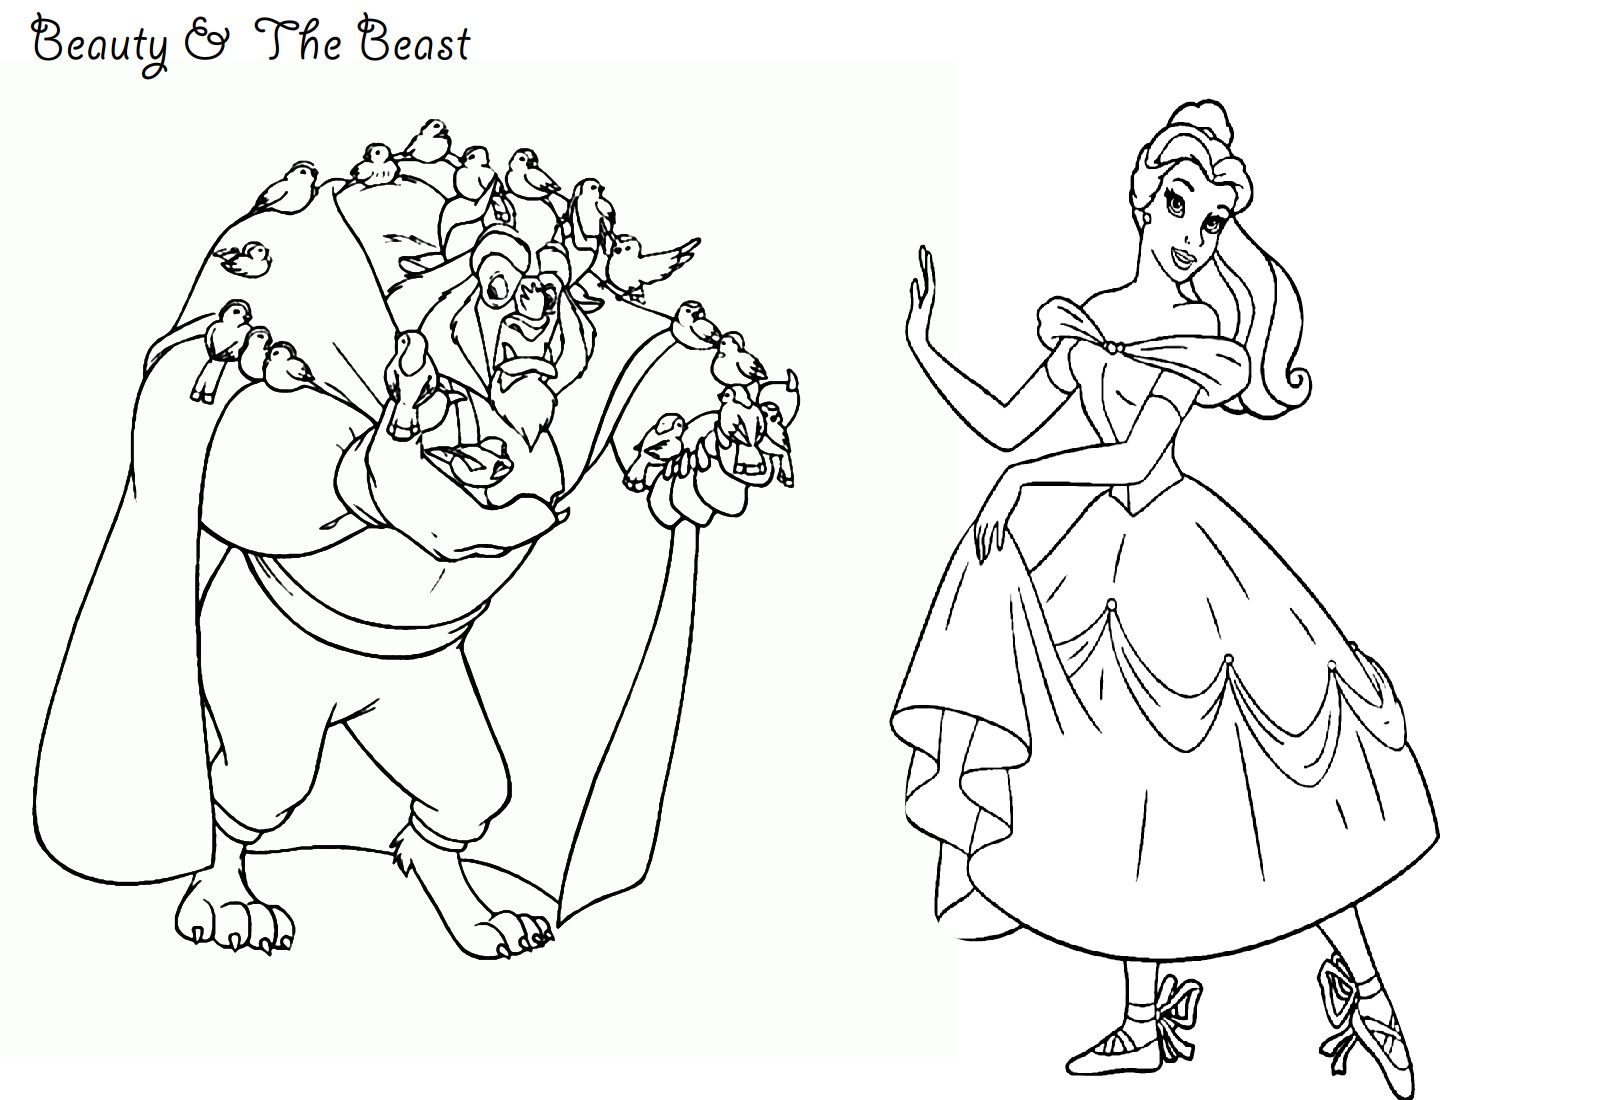 Beauty and the beast coloring page belle and beast at garden printable coloring page